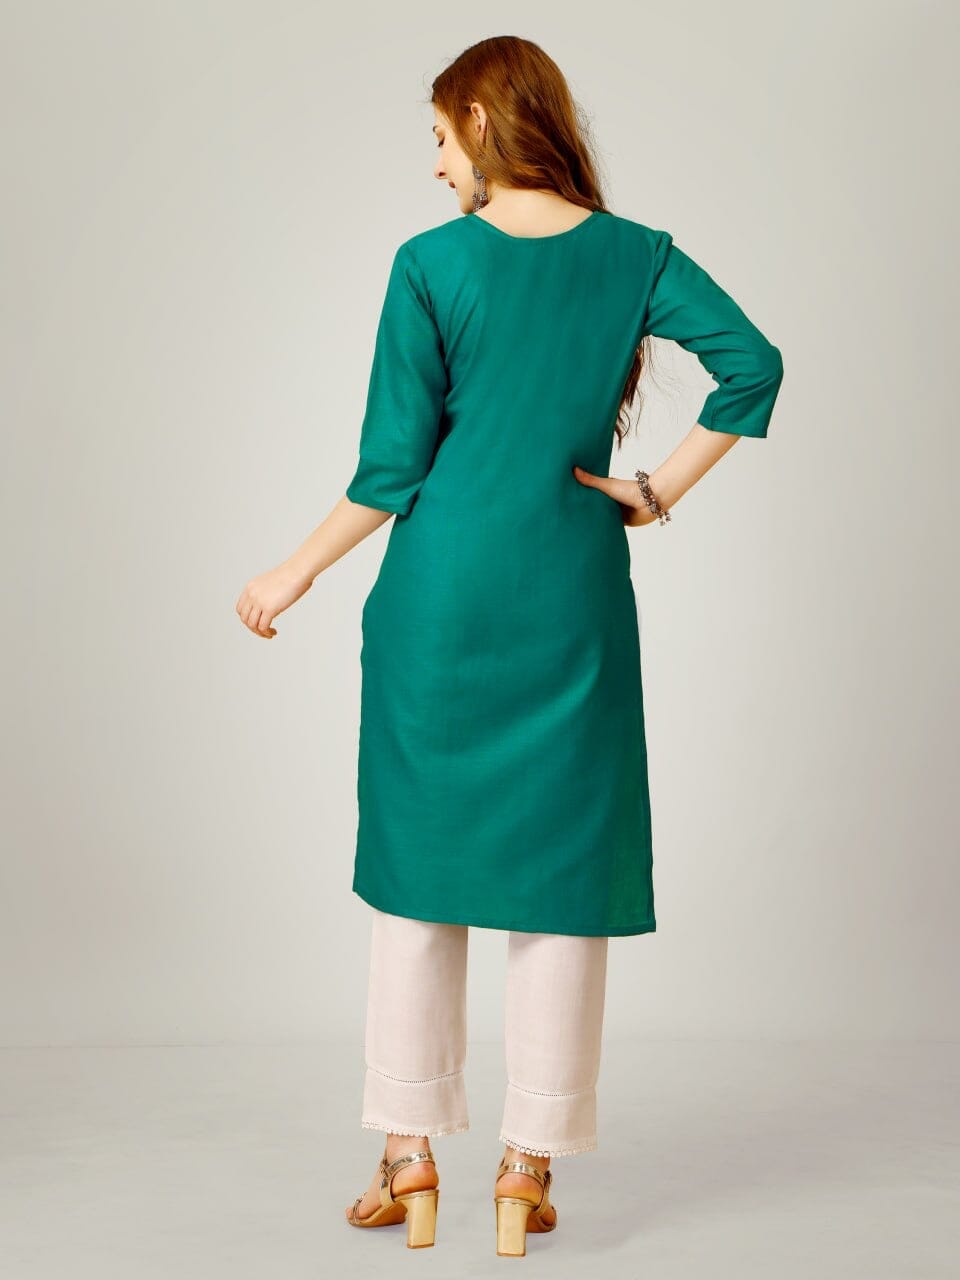 Green Cotton Blend Sequence Embroidered Work Kurti with Pant Kurti with Pant Shopin Di Apparels 